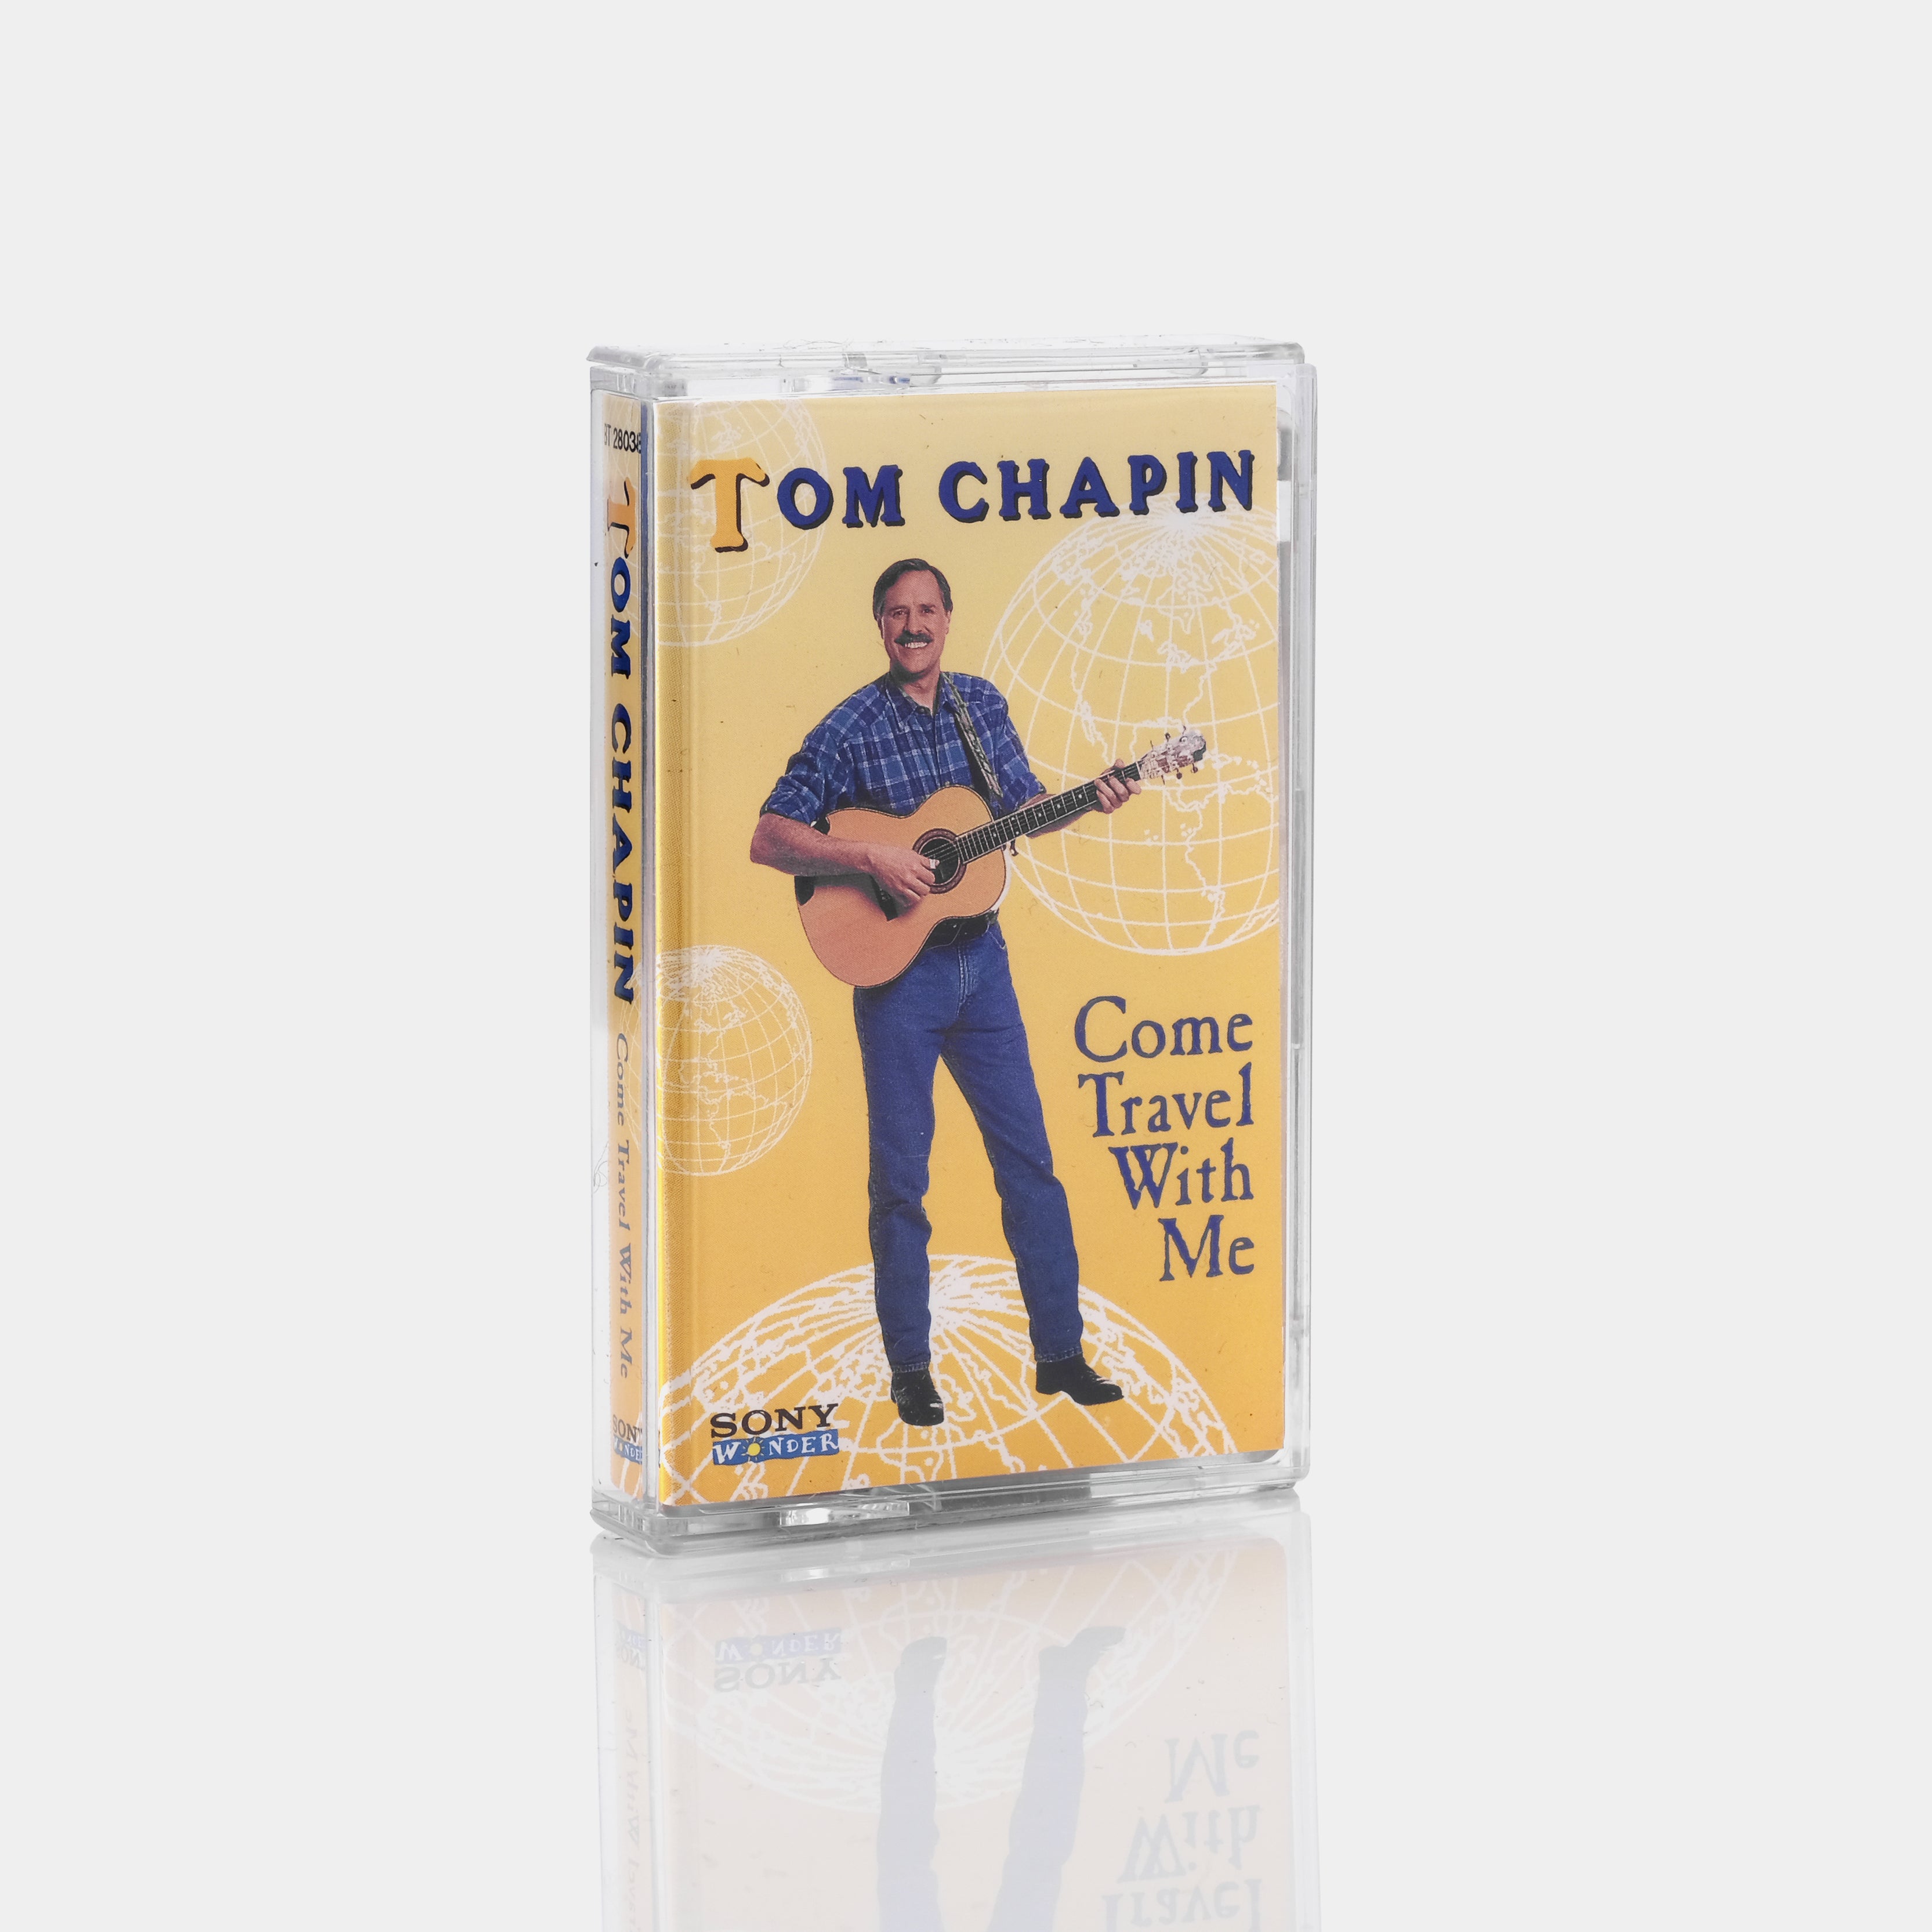 Tom Chapin - Come Travel With Me Cassette Tape